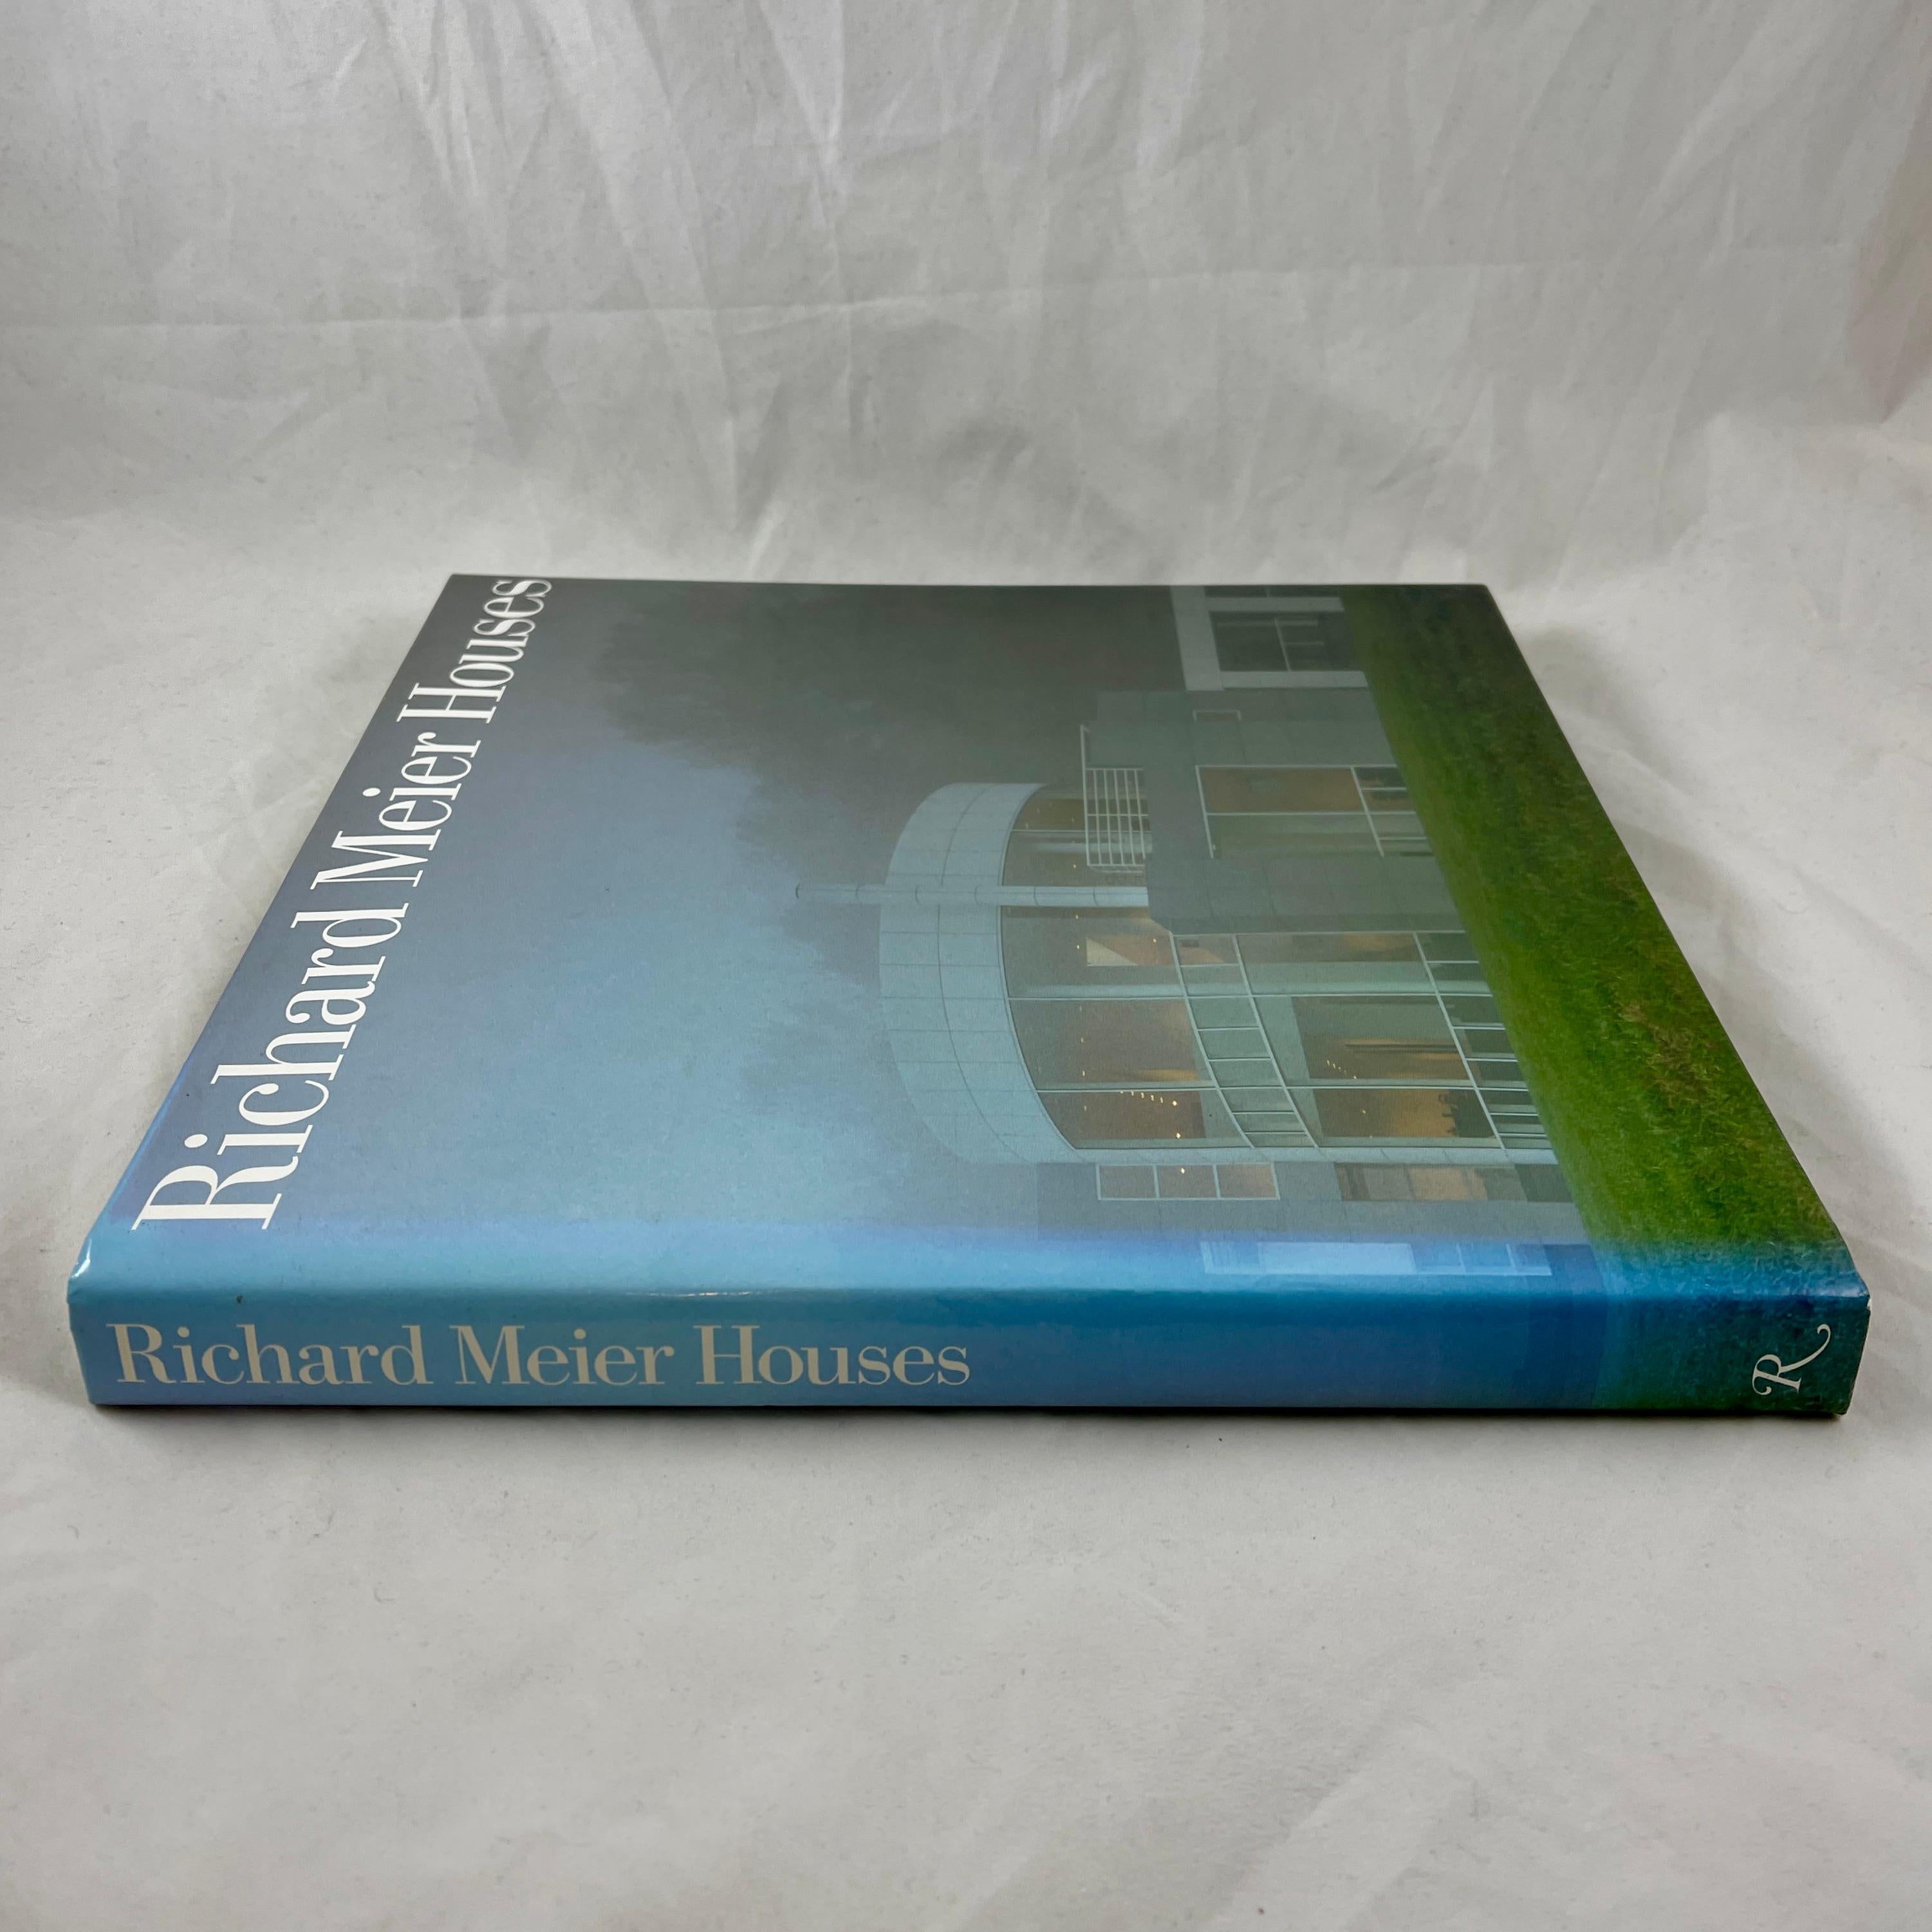 Richard Meier: Houses 1962/1997 Hardcover – September 15, 1996
by Richard Meier and Paul Goldberger

This oversized book presents 14 built American houses by one of the world’s most influential and widely emulated architects. New color interior